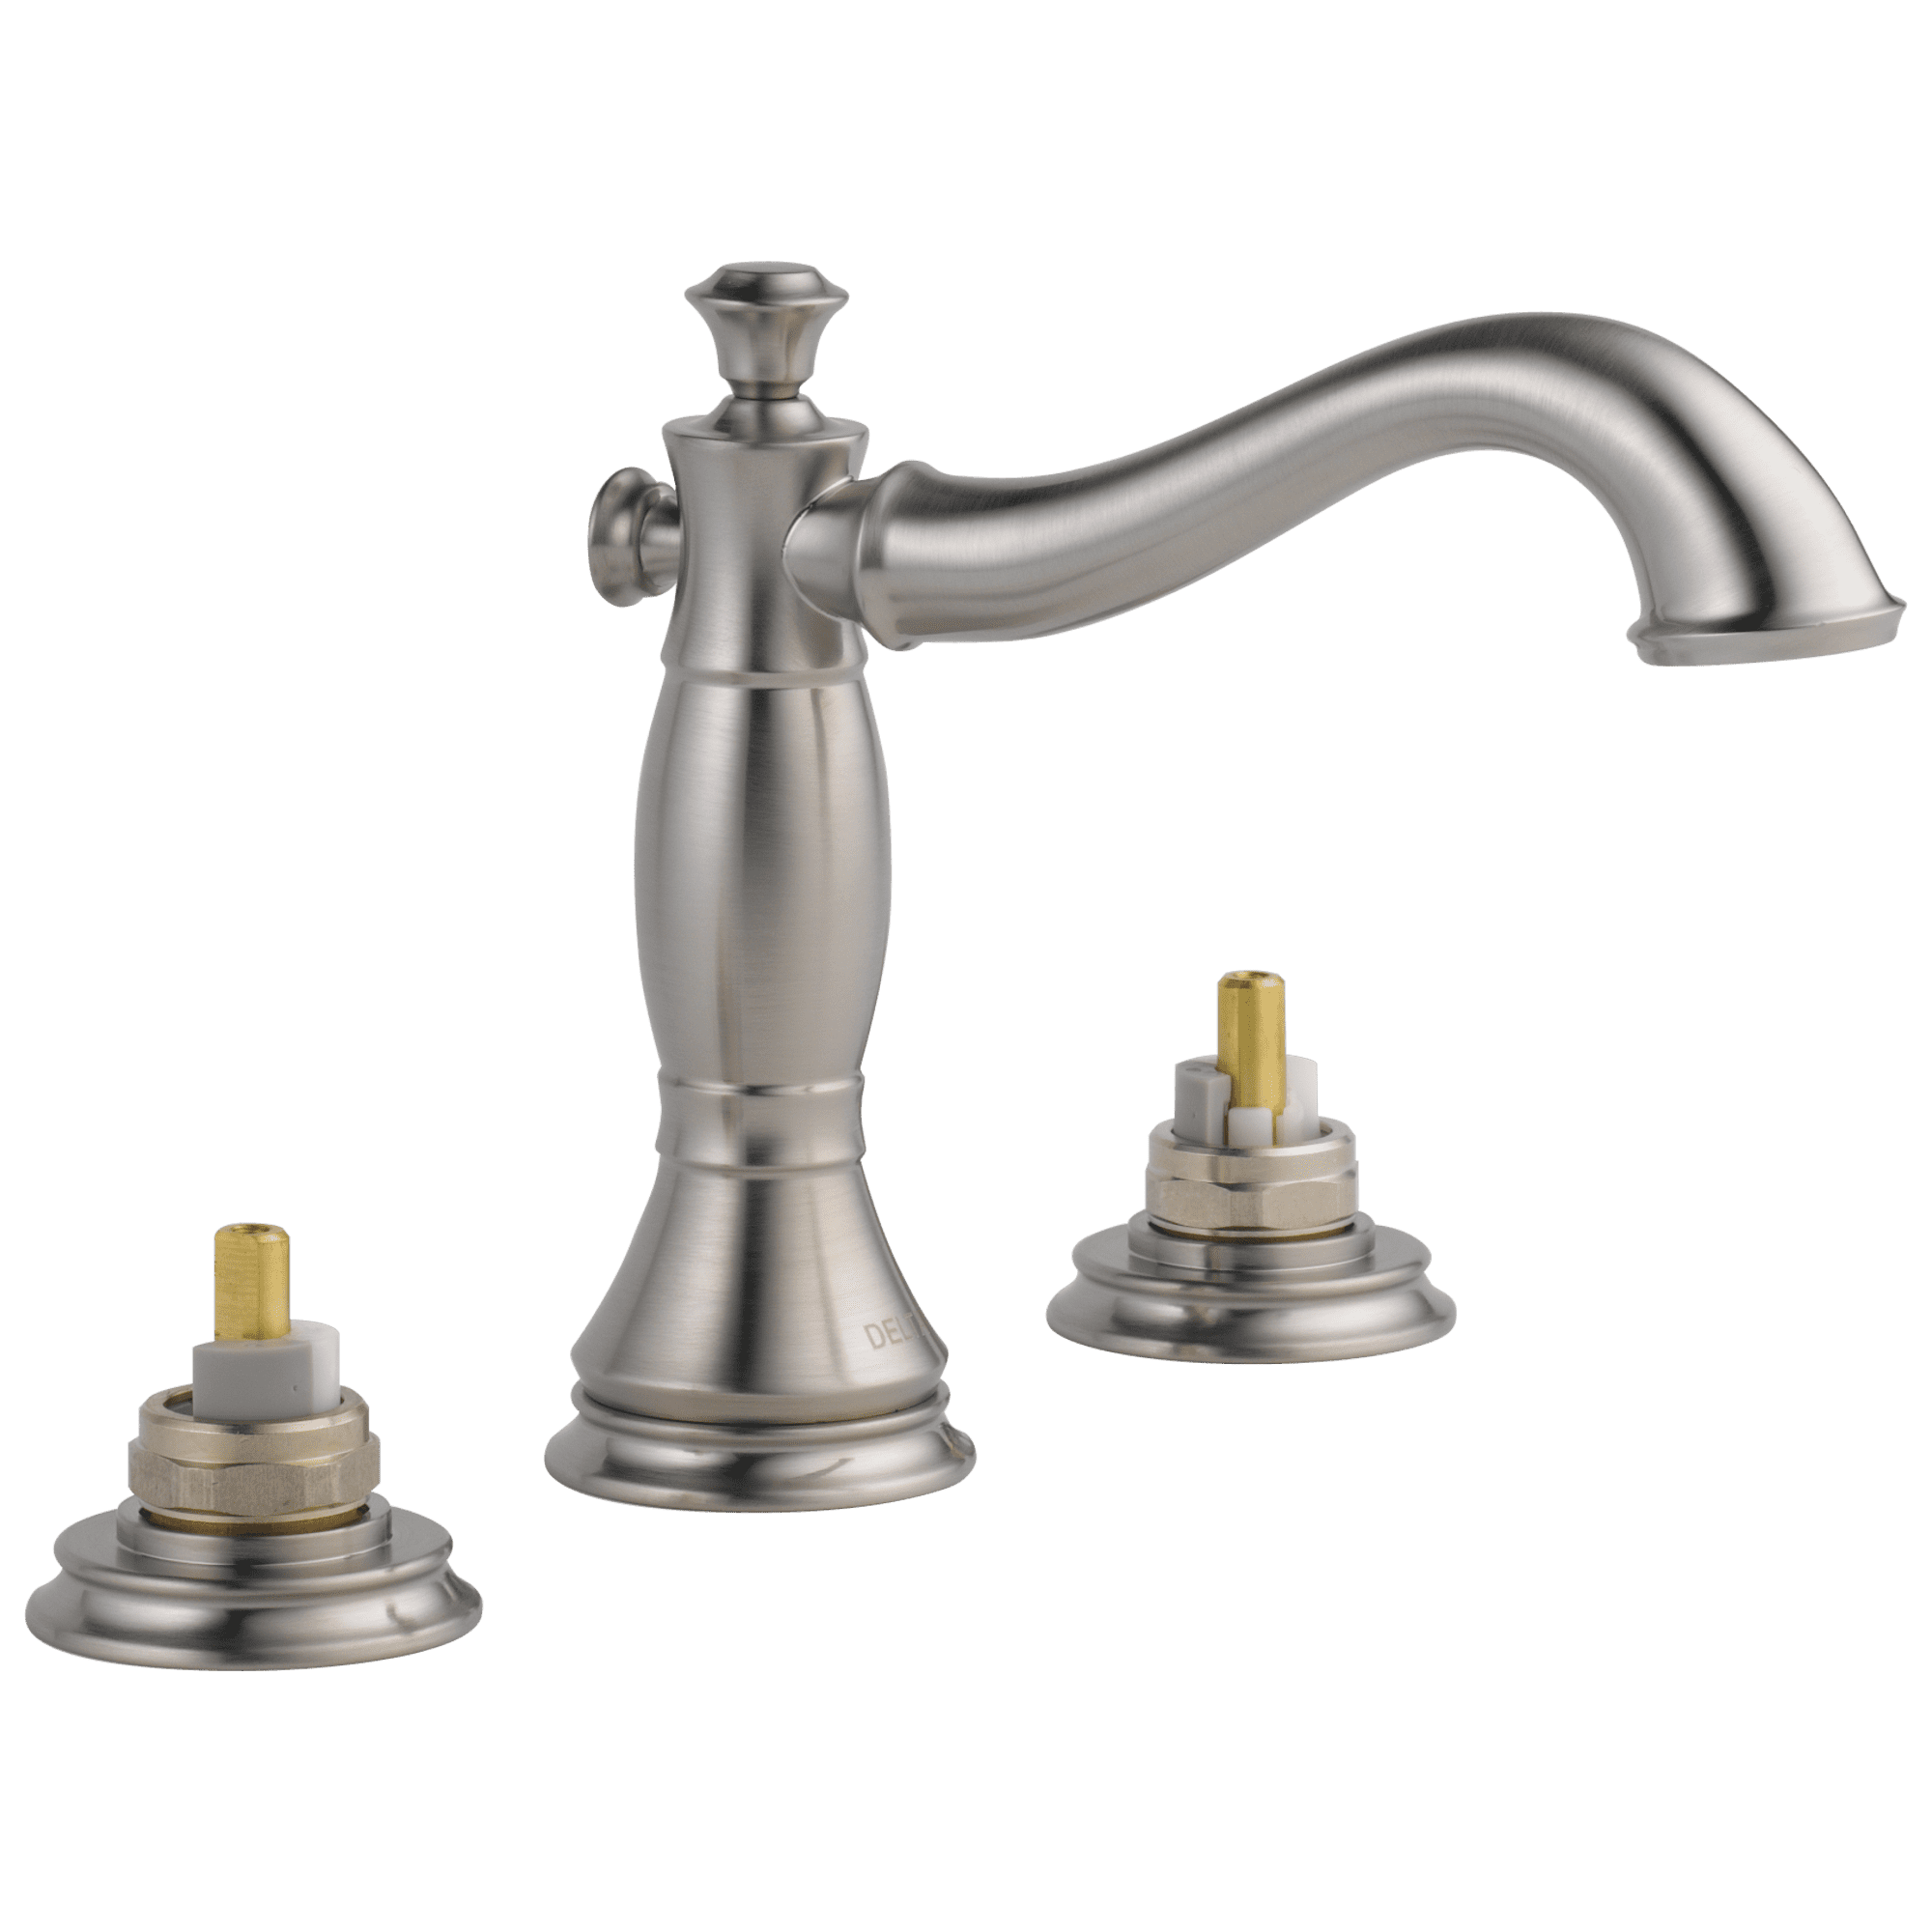 Elegant Cassidy Stainless Steel Widespread Bathroom Faucet